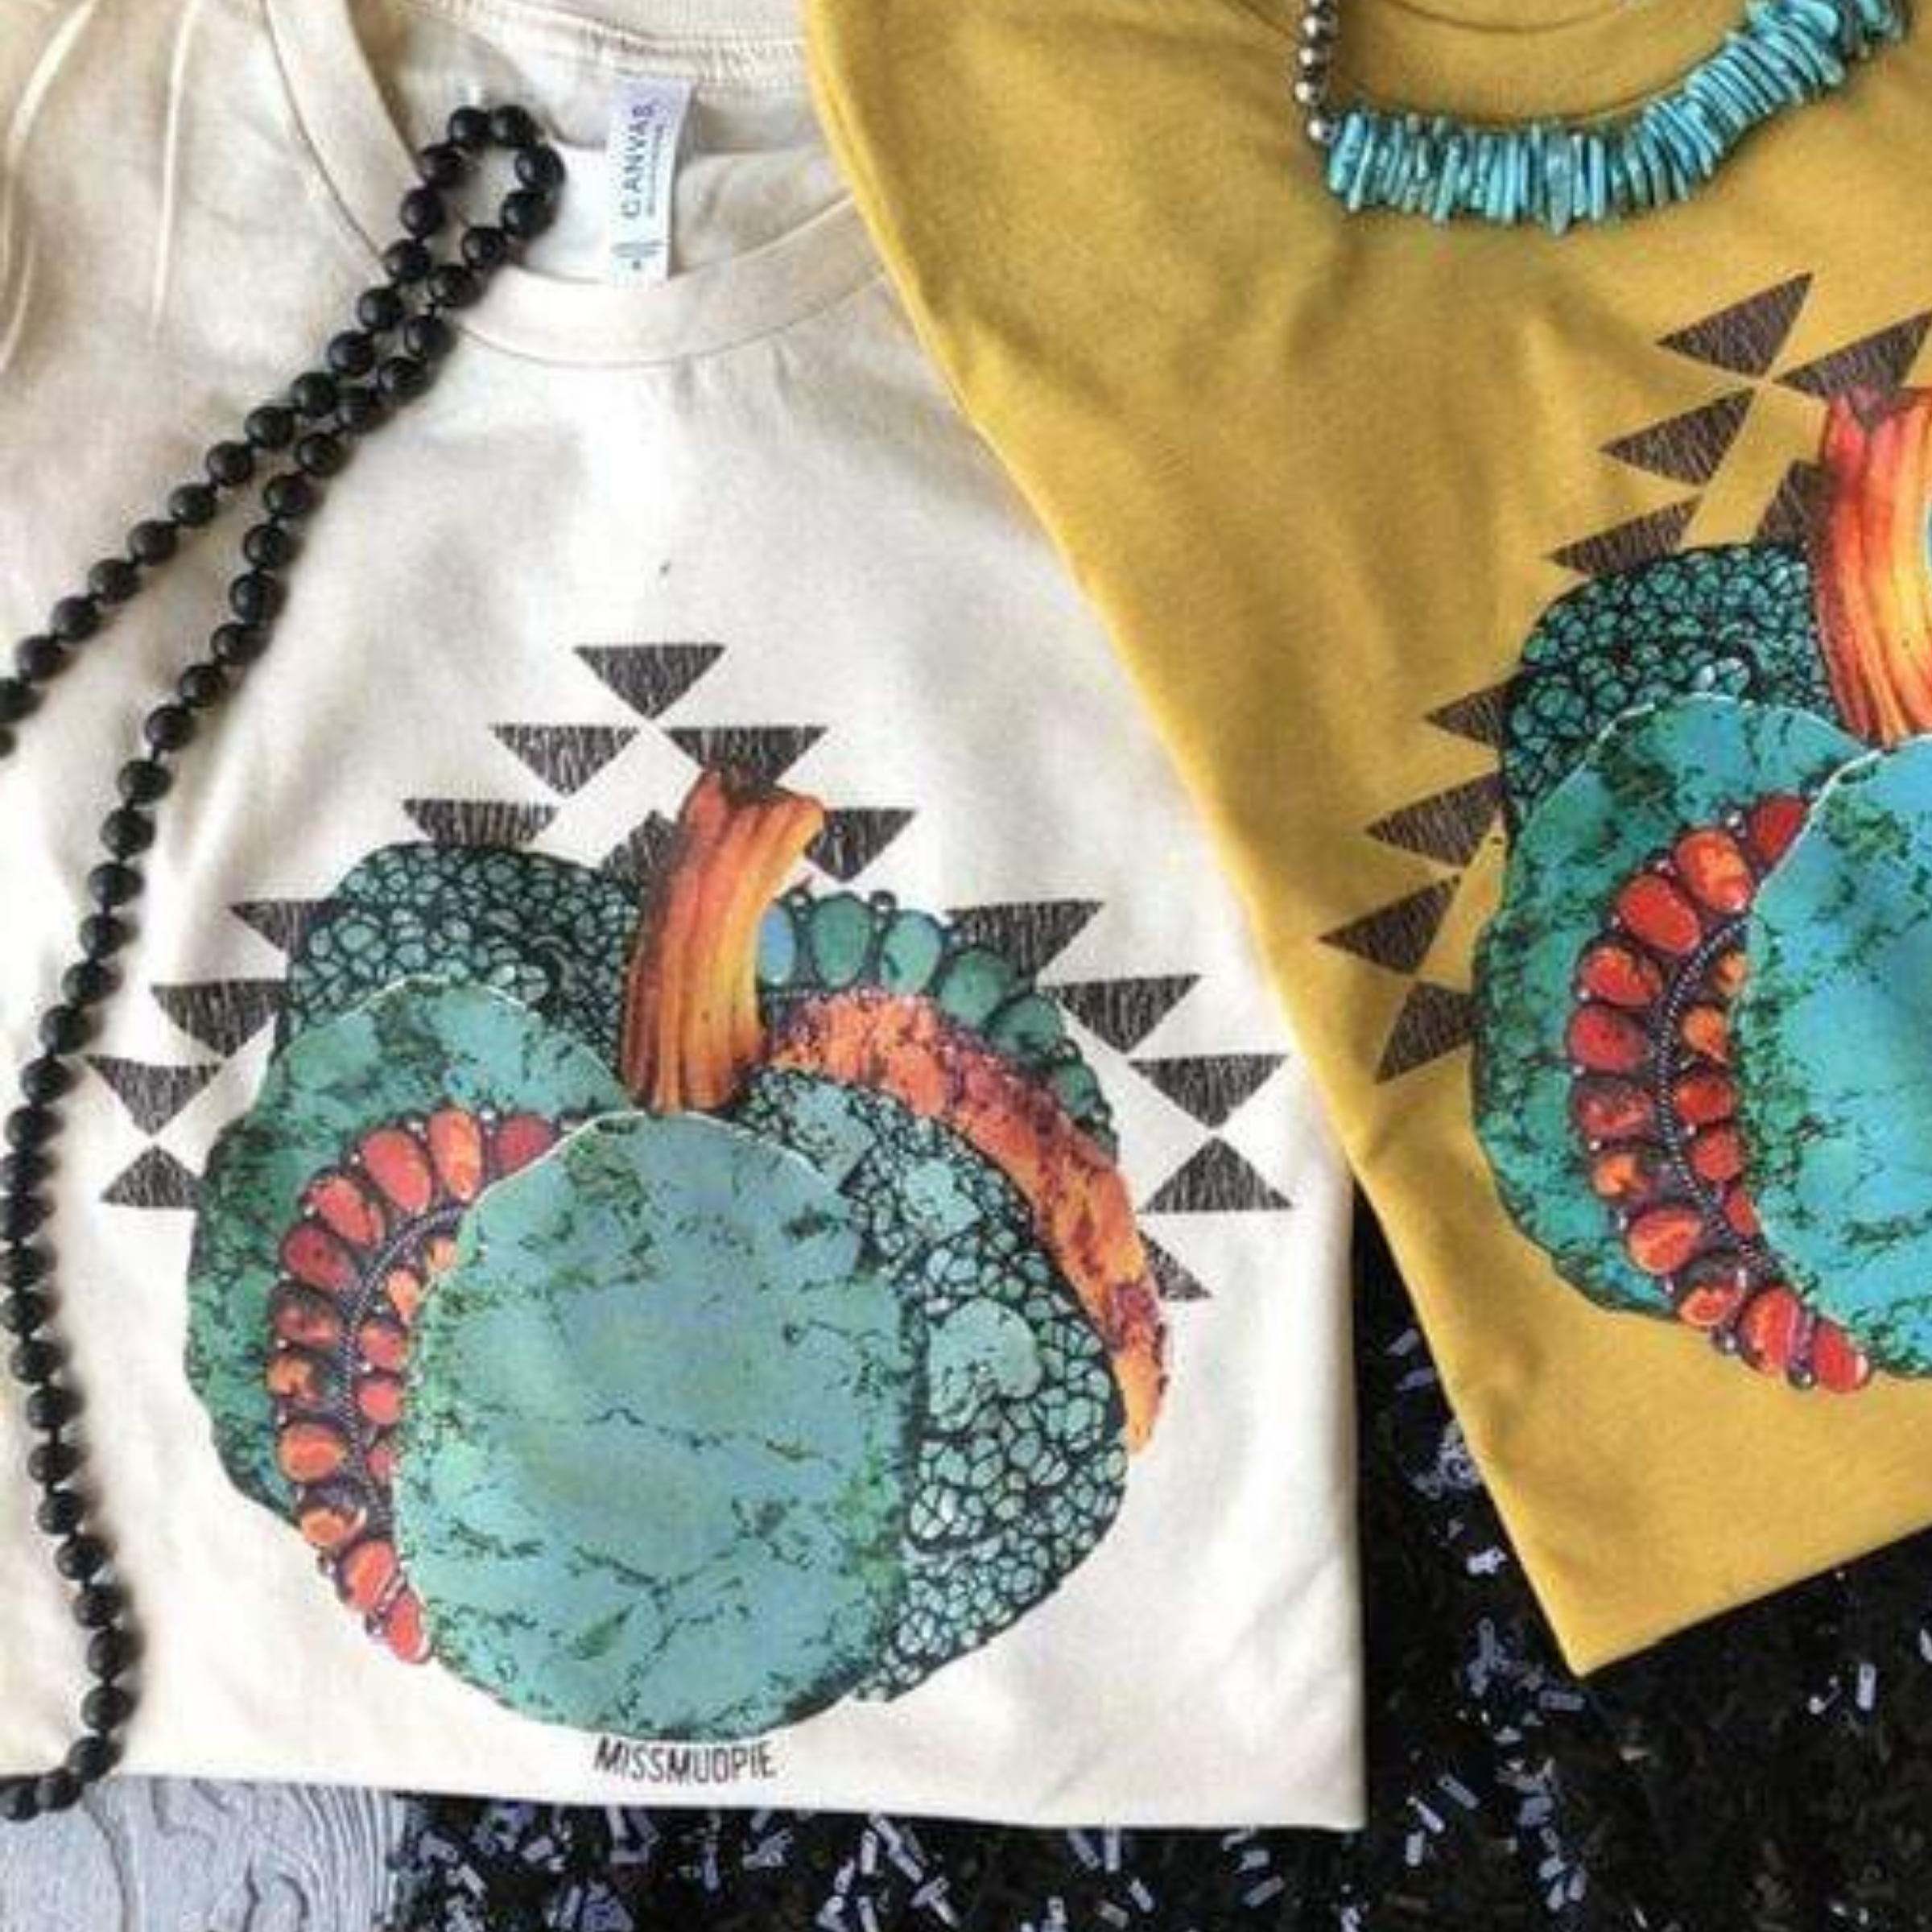 This is a cream graphic tee with a turquoise pumpkin. There is a red accent piece of jewelry in the side of the pumpkin. There are multiple many triangles surrounding the pumpkin. This top is paired with a long black beaded necklace.